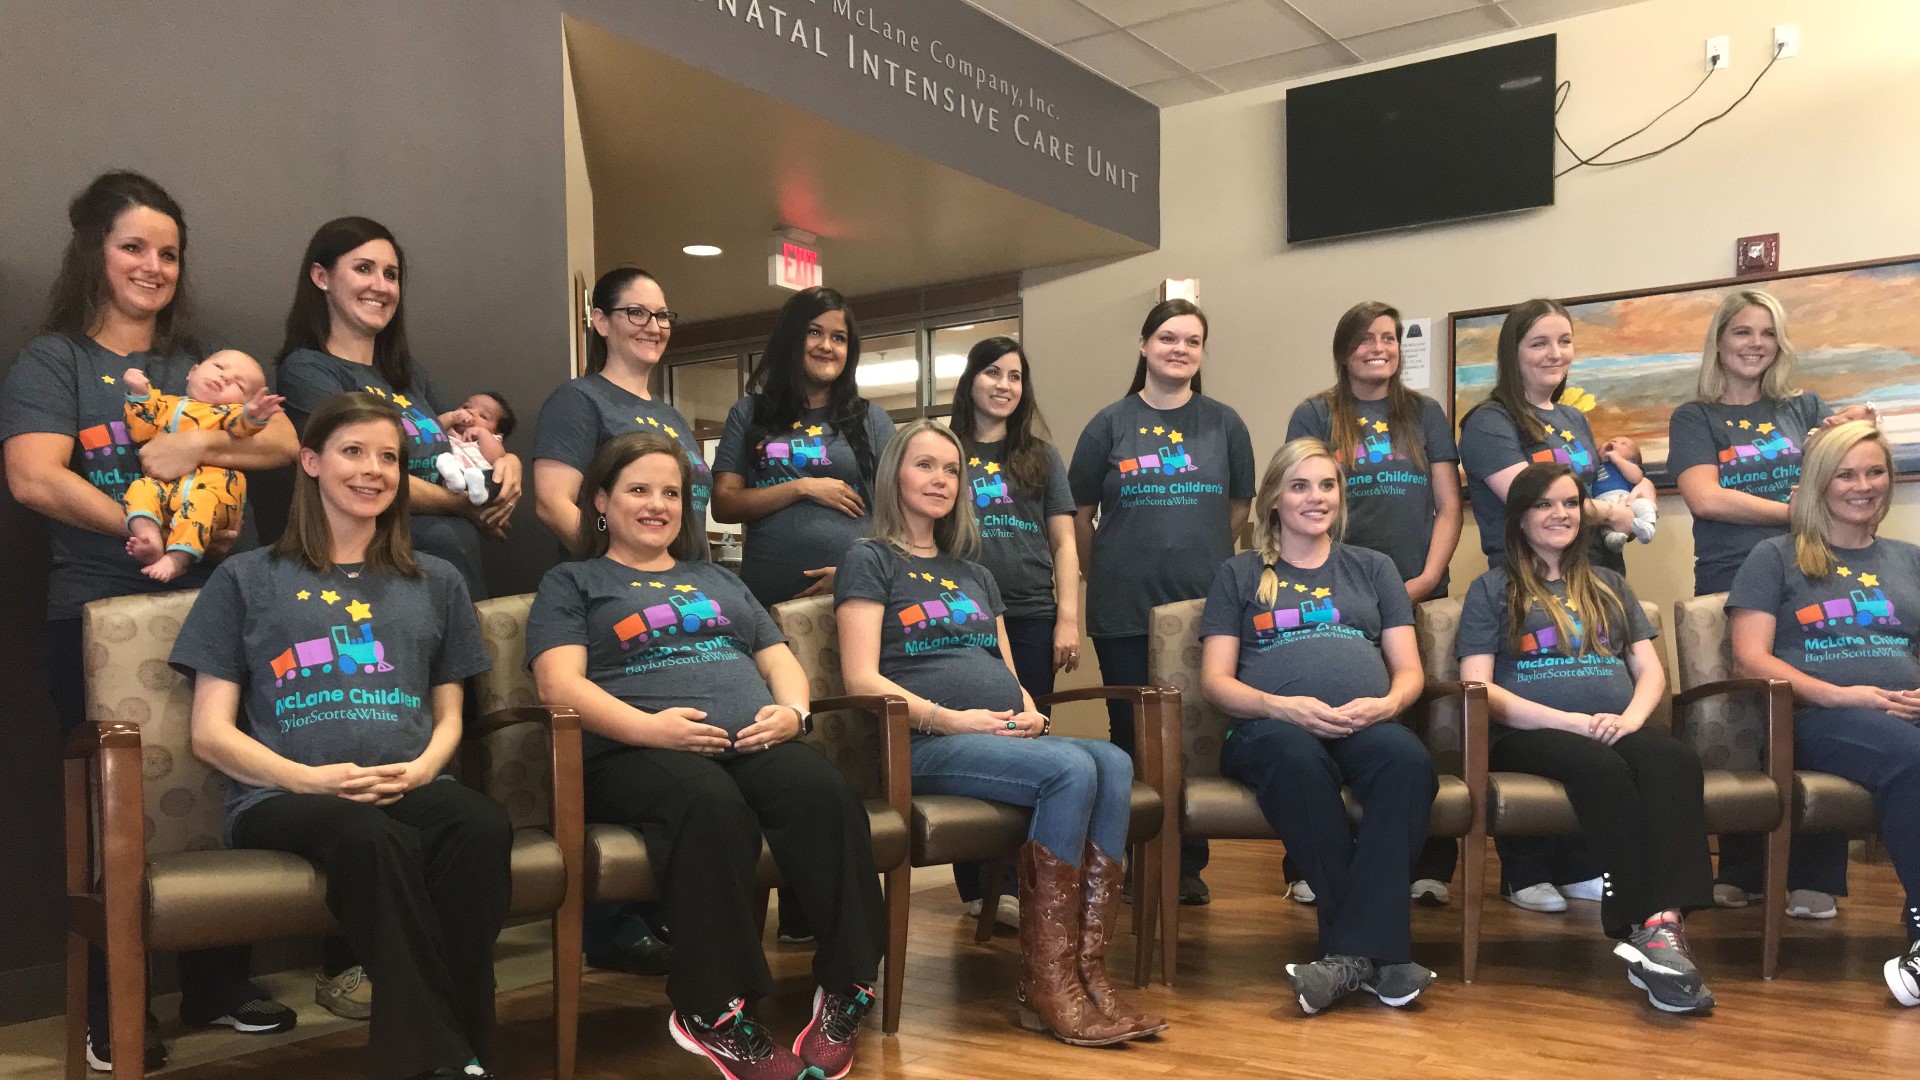 While some of them have already had their bundles of joy, at one point 19 Baylor Scott and White NICU nurses were pregnant at the same time.